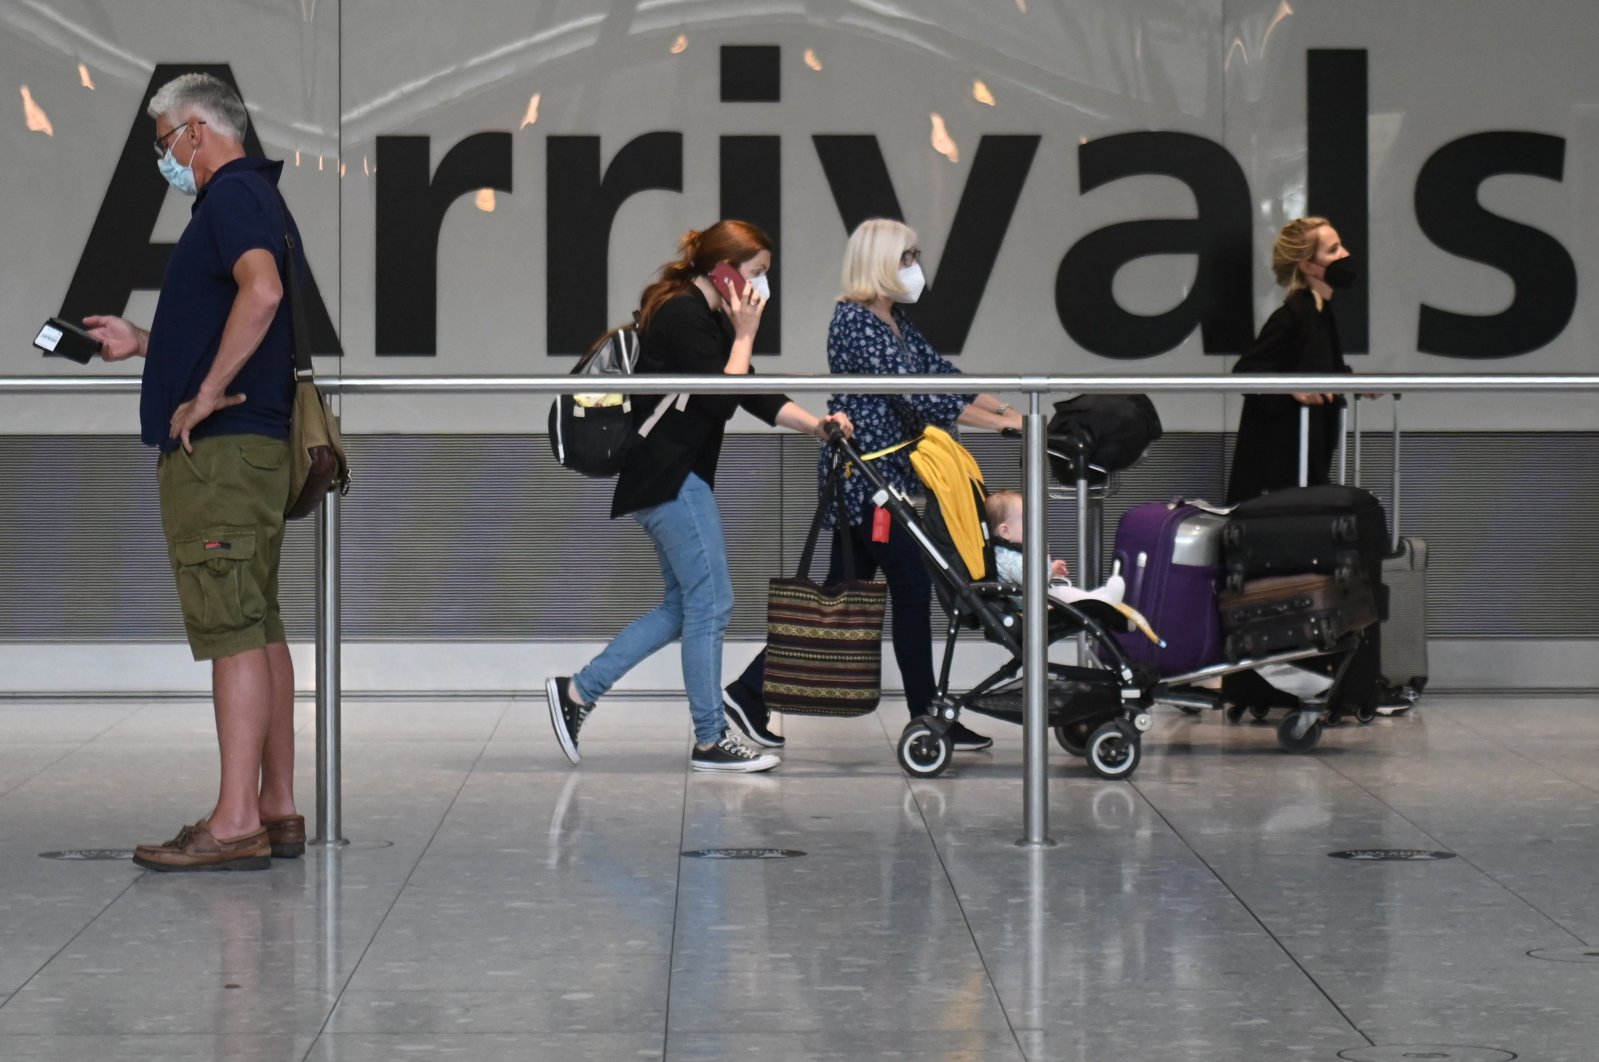 Passengers push their luggage on arrival in Terminal 5 at Heathrow Airport in London, U.K, June 3, 2021. (AFP Photo)